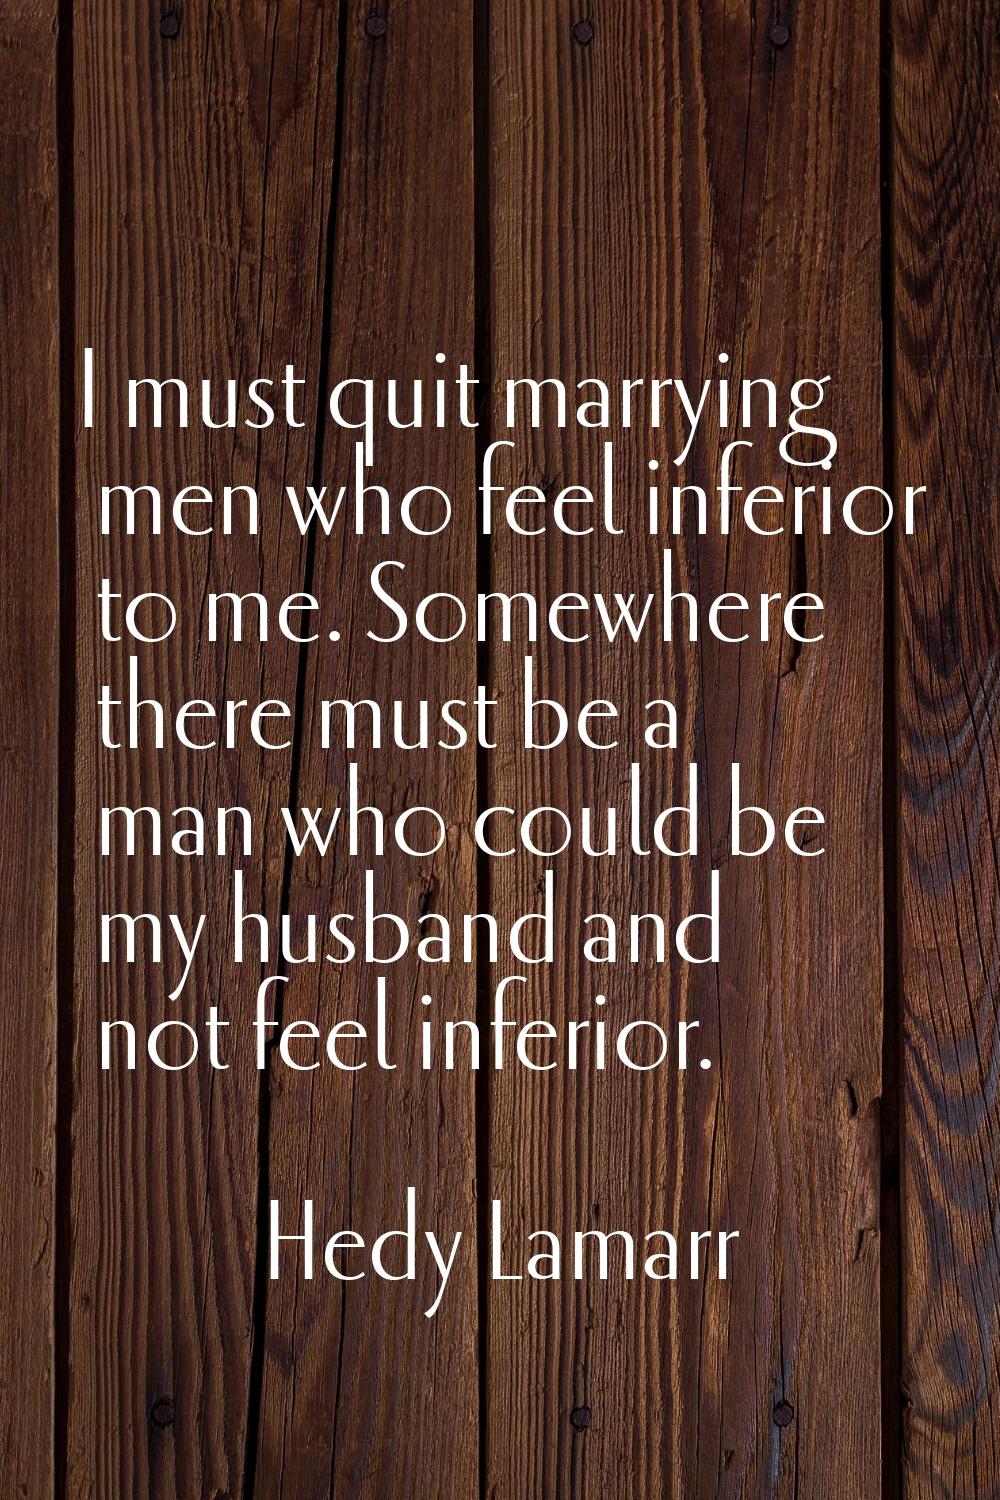 I must quit marrying men who feel inferior to me. Somewhere there must be a man who could be my hus